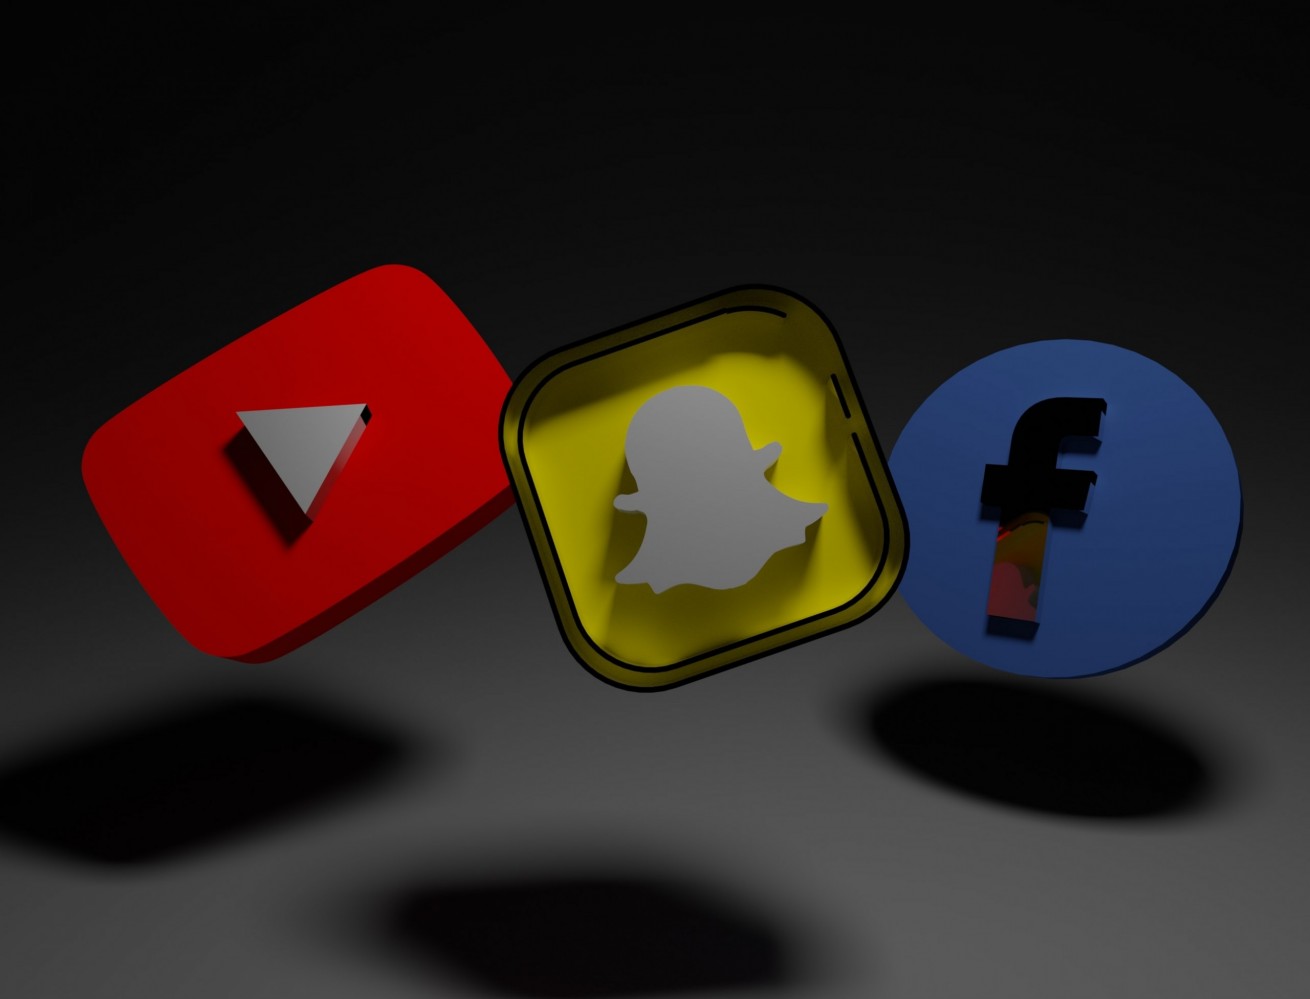 YouTube, Snapchat and Facebook logos side by side